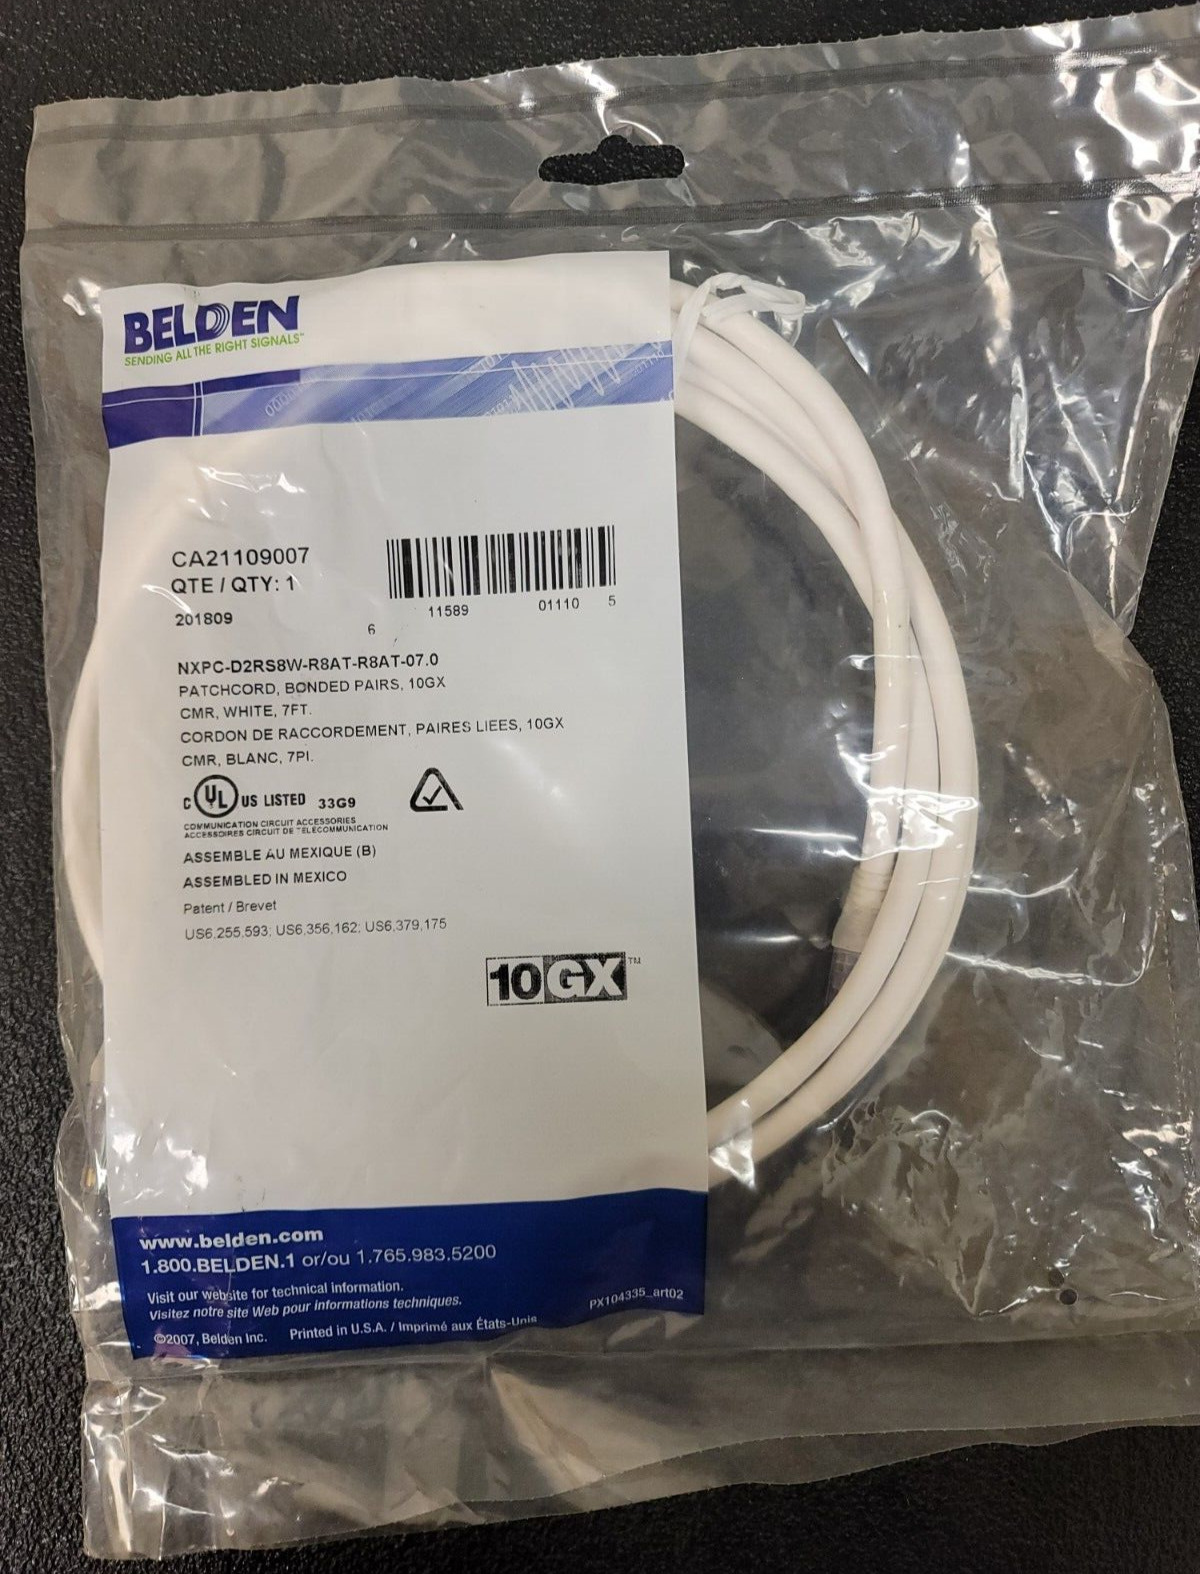 Belden Cat6A 7 FT Patch cord 24AWG 625Bonded Pair 10GX White - RJ45 CA21109007